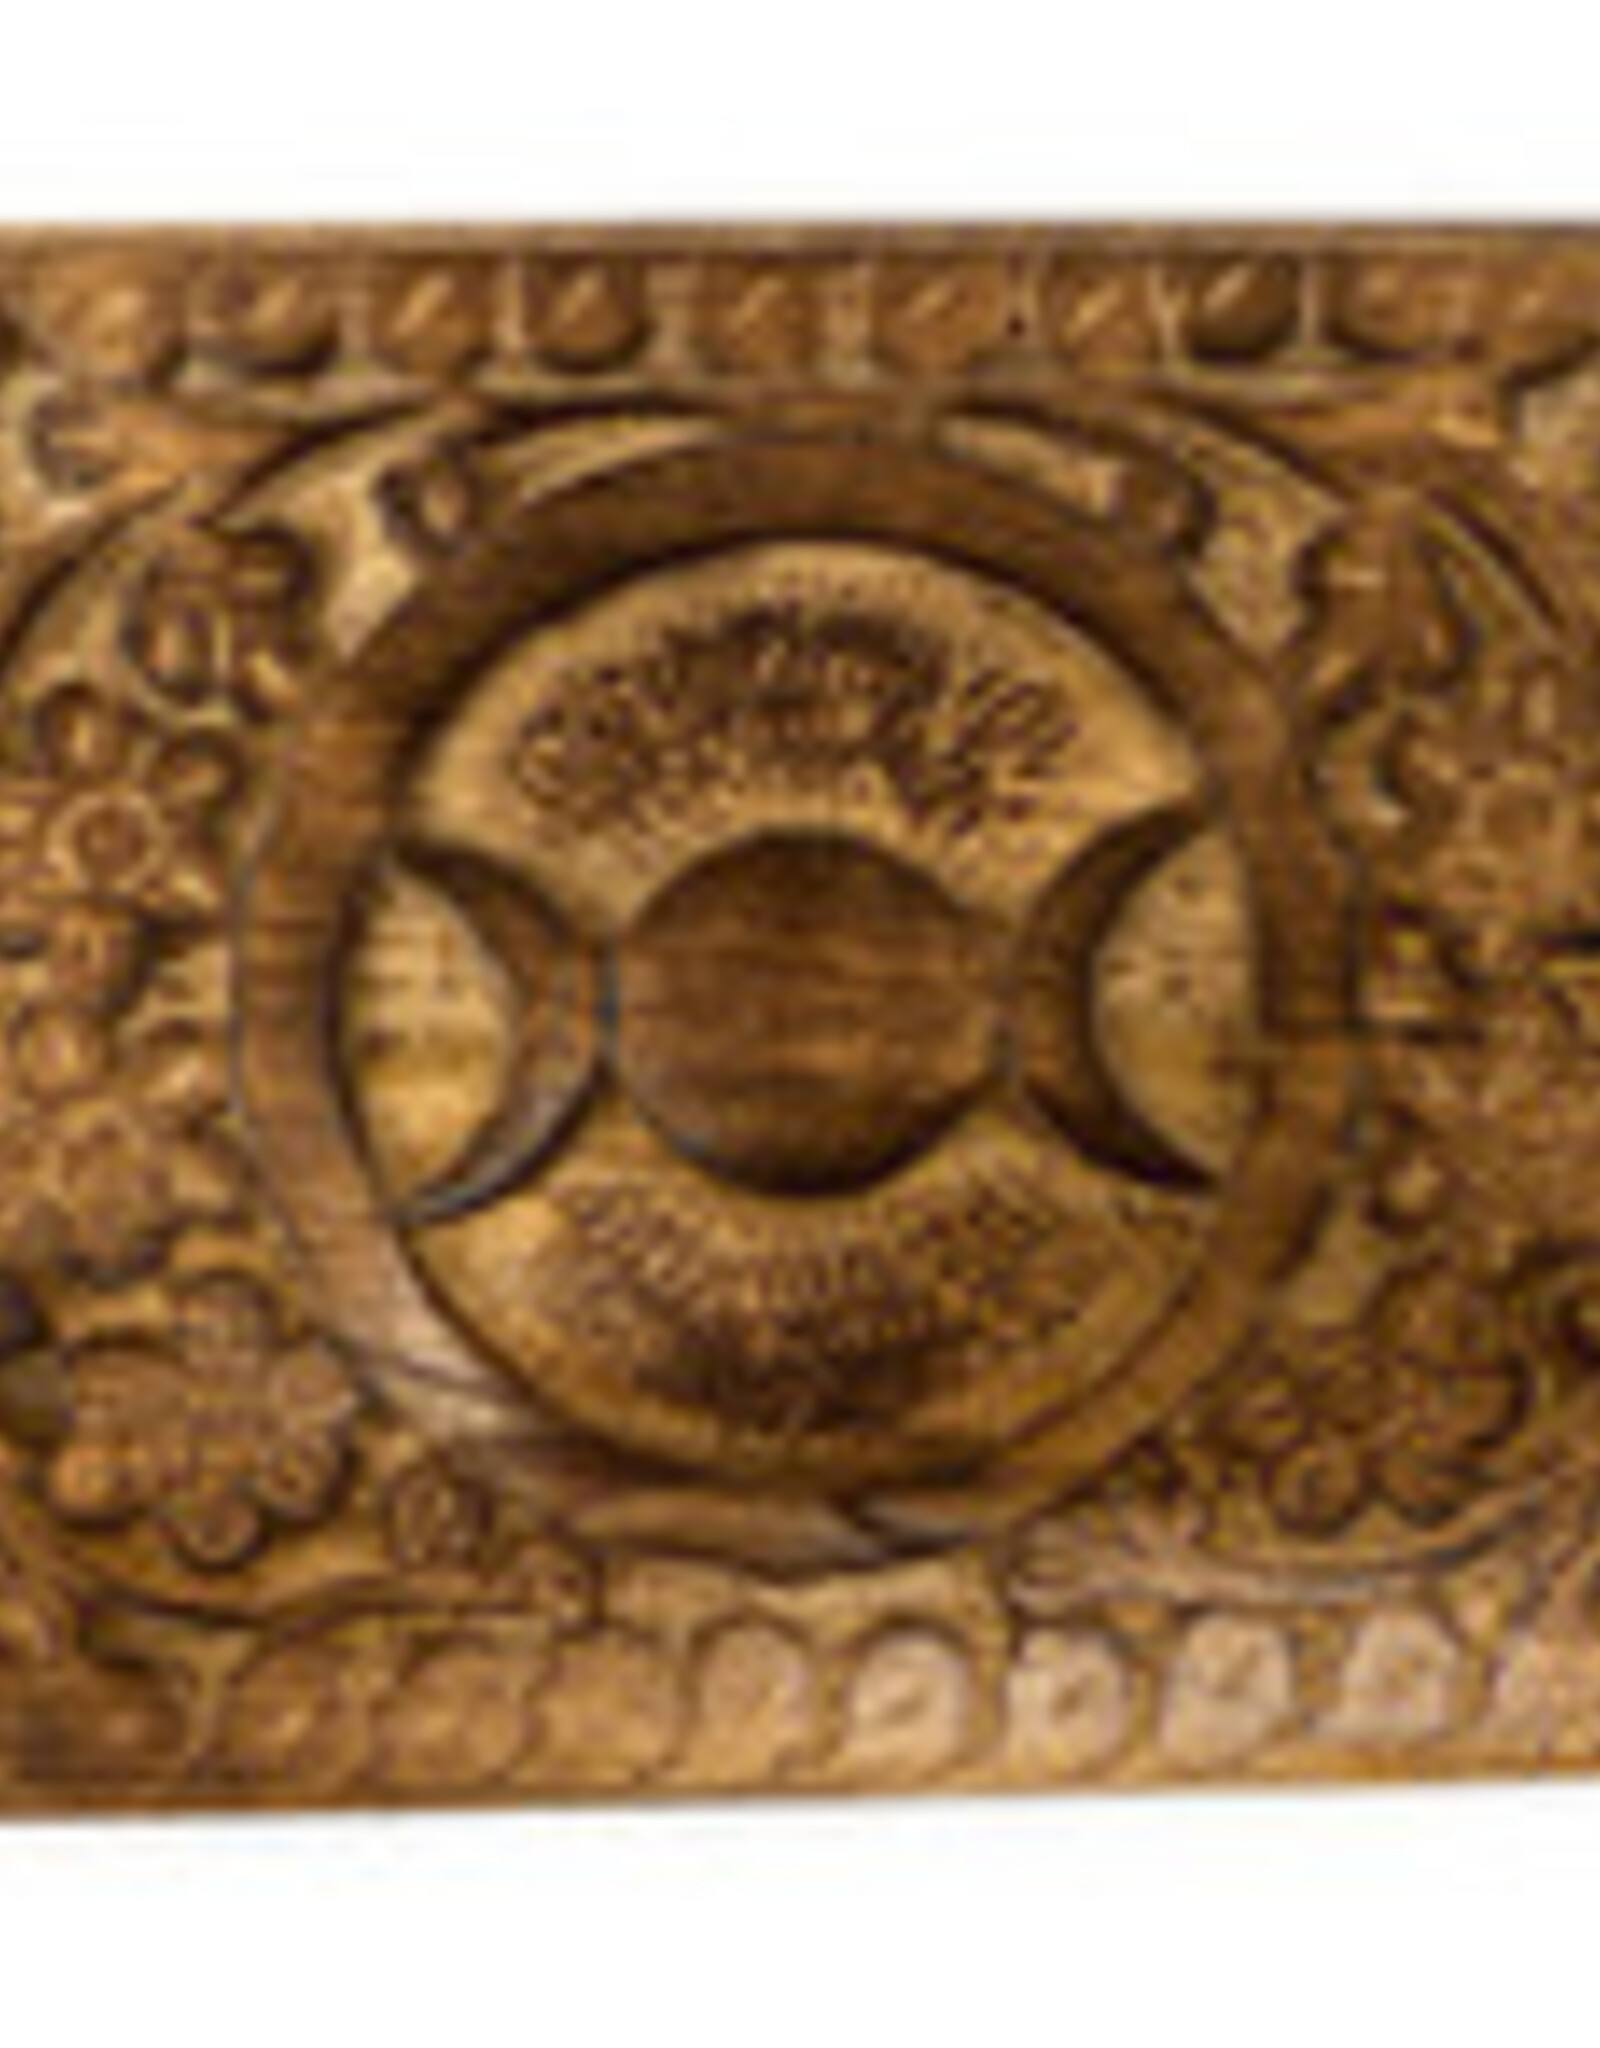 Wooden Carved Boxes 4 x 6"